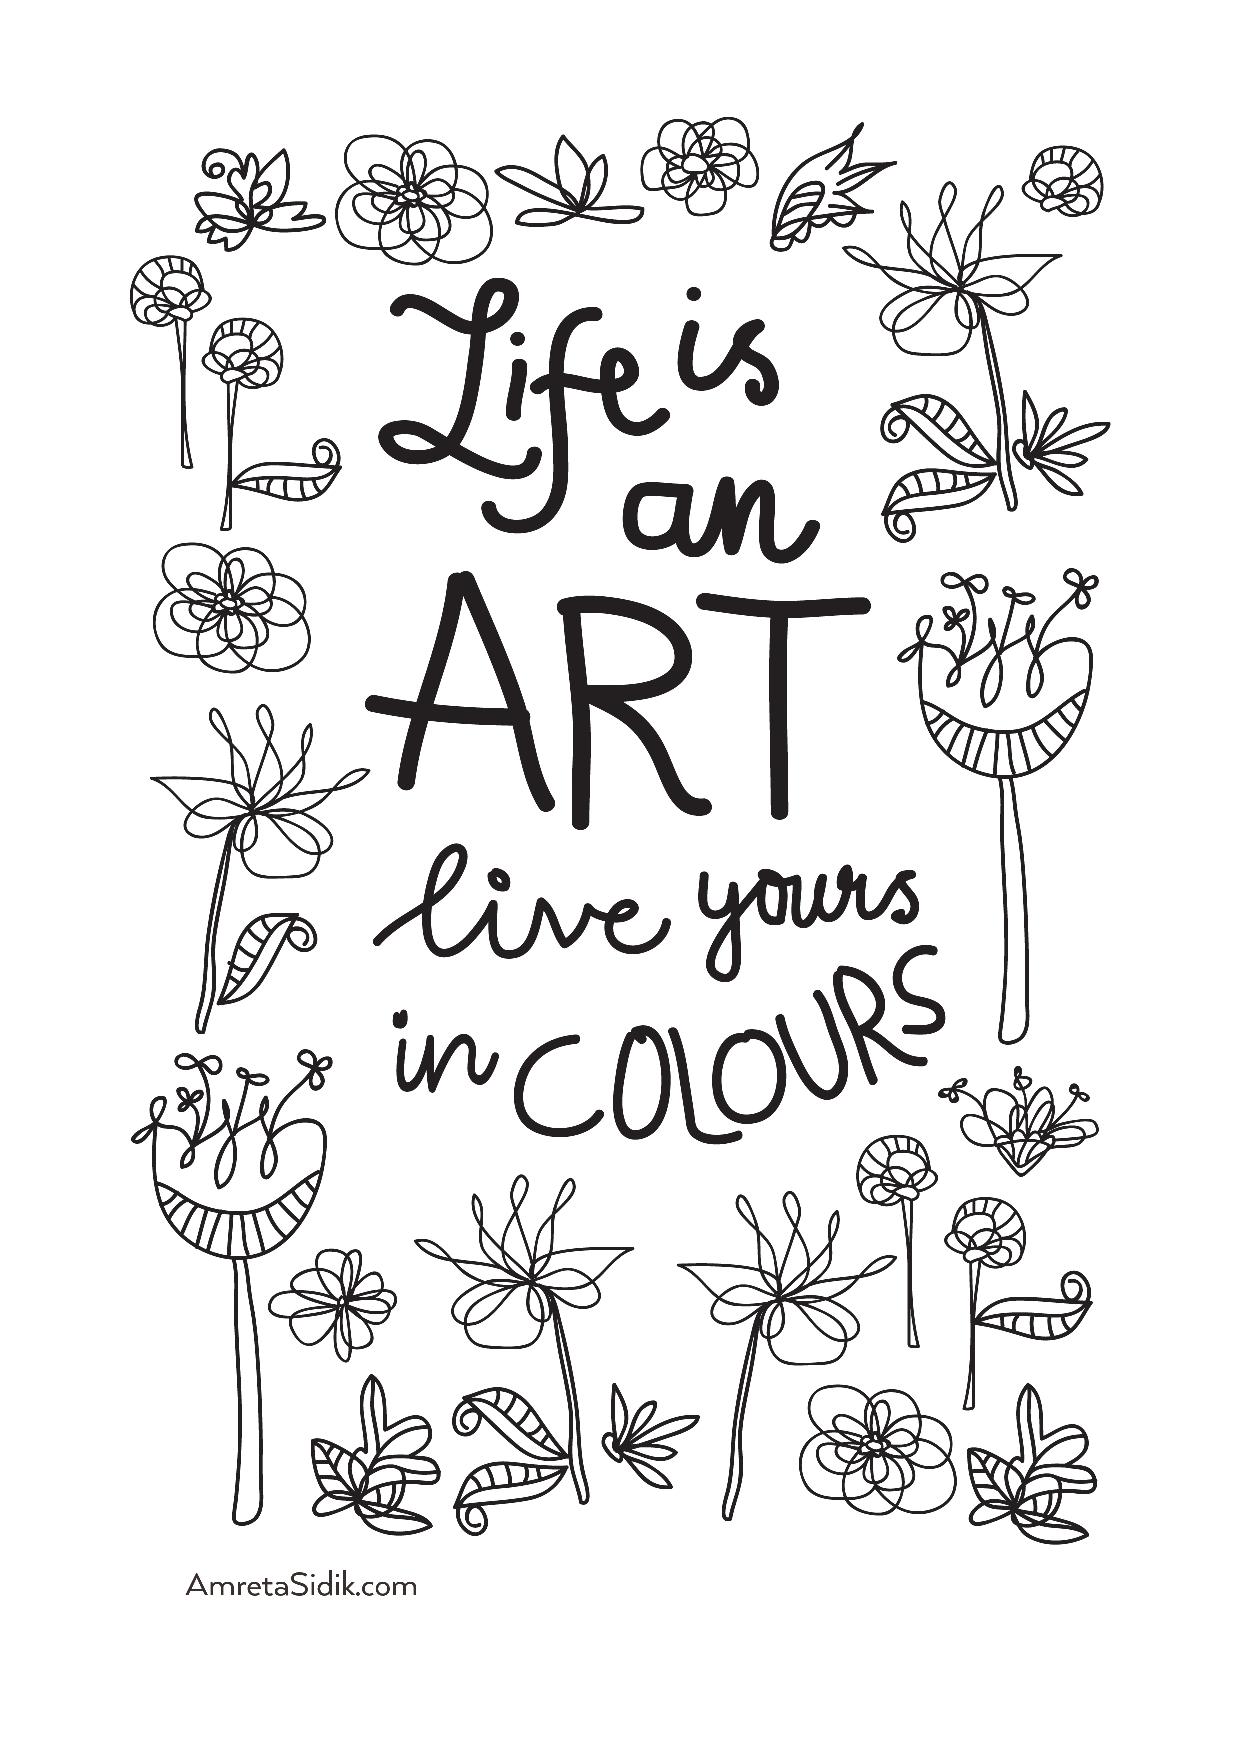 Sentence 'Life is an art, live yours in color' and cute flowers to color